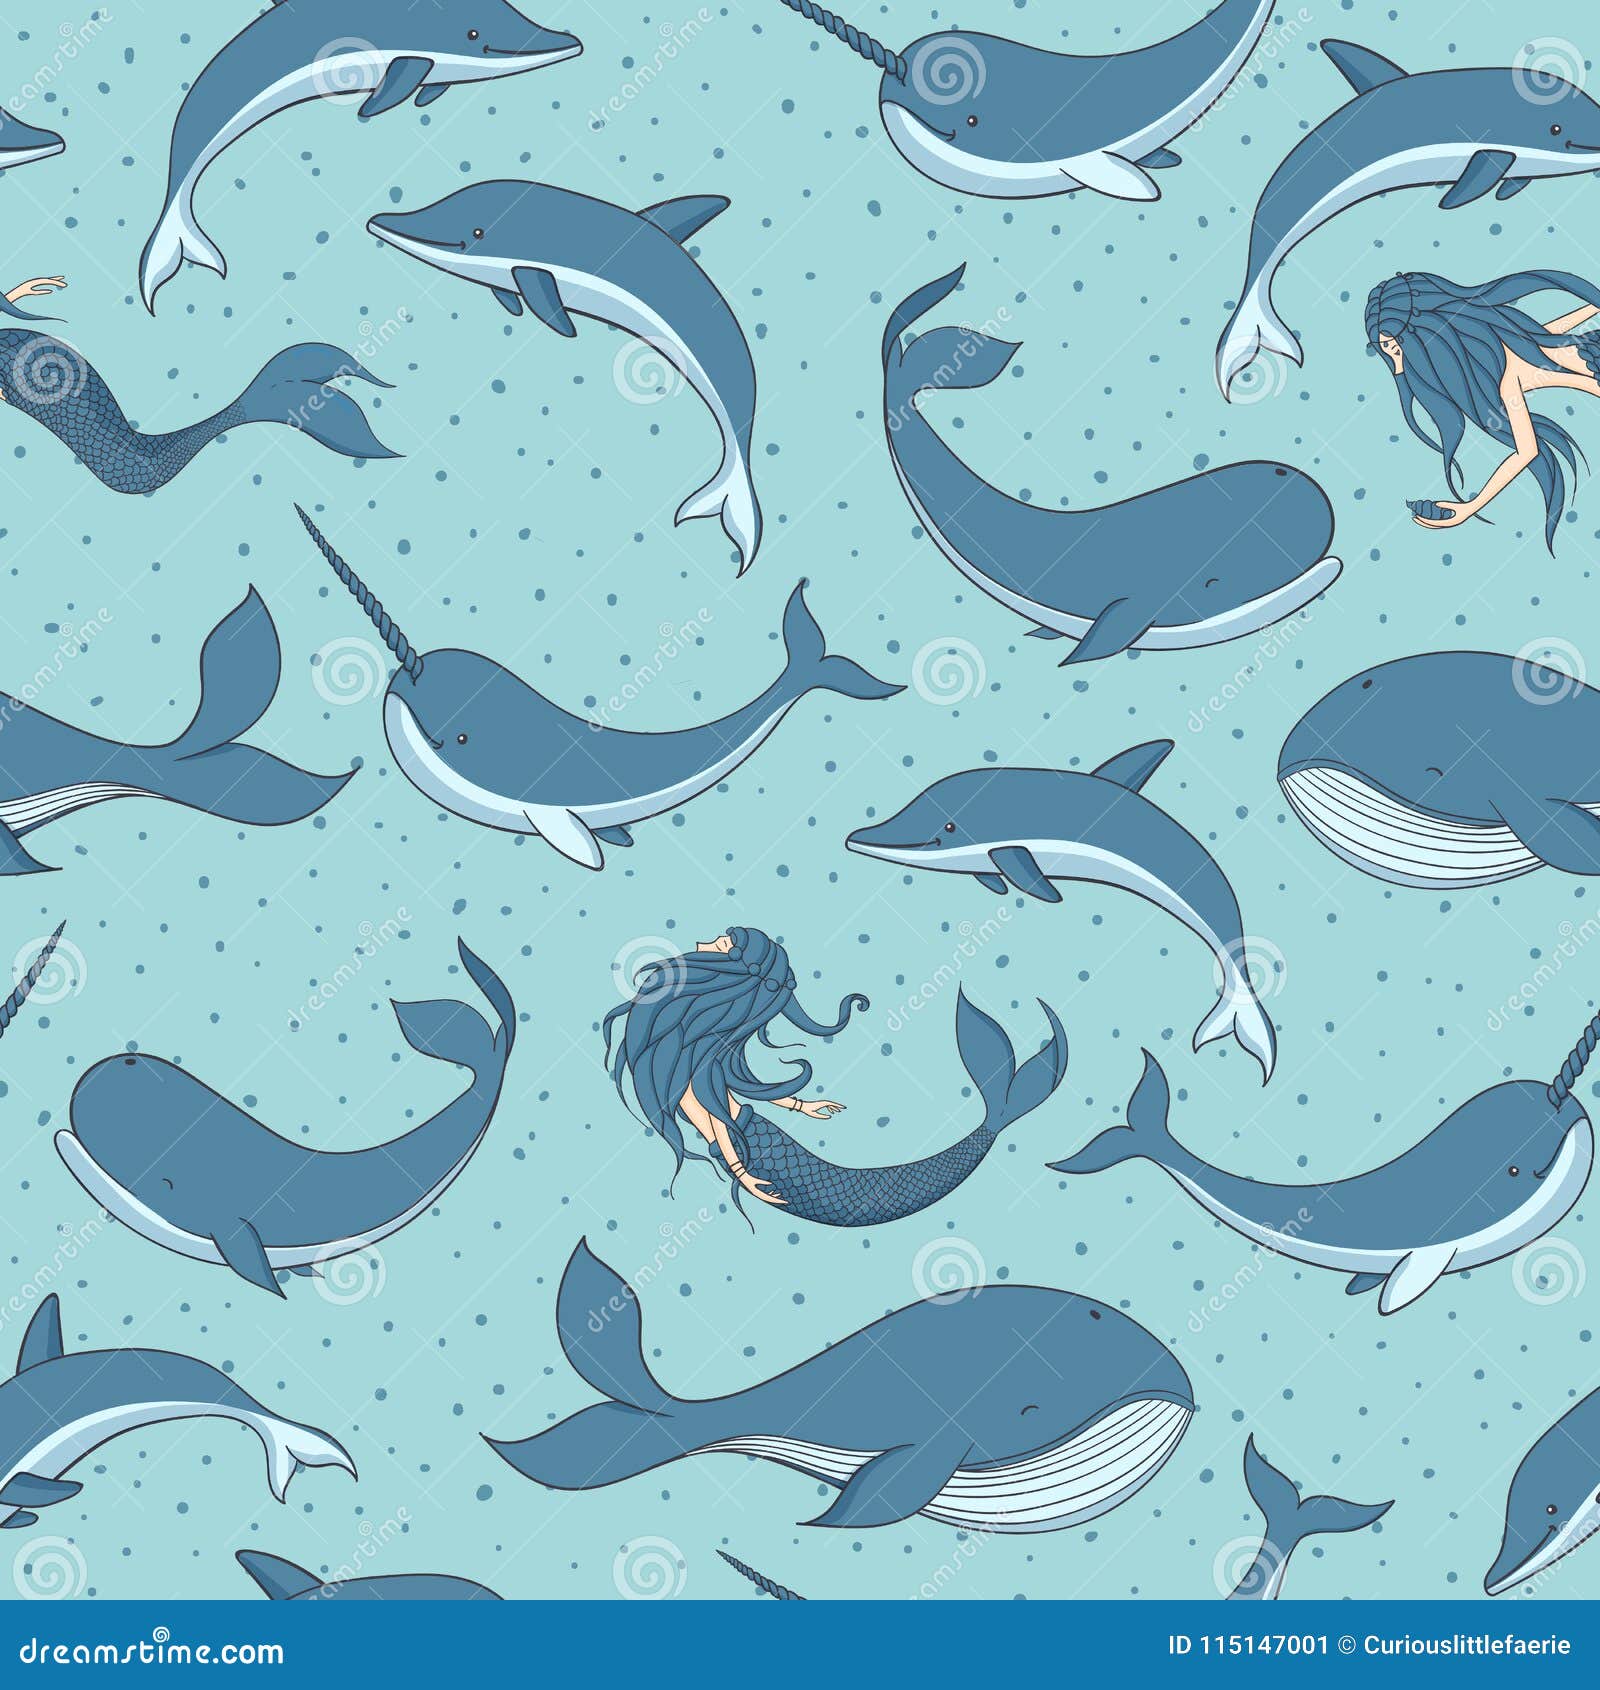  seamless pattern with whales, mermaids, narwhals and dolphins on the dotted blue background. sea creatures, sirens and mar